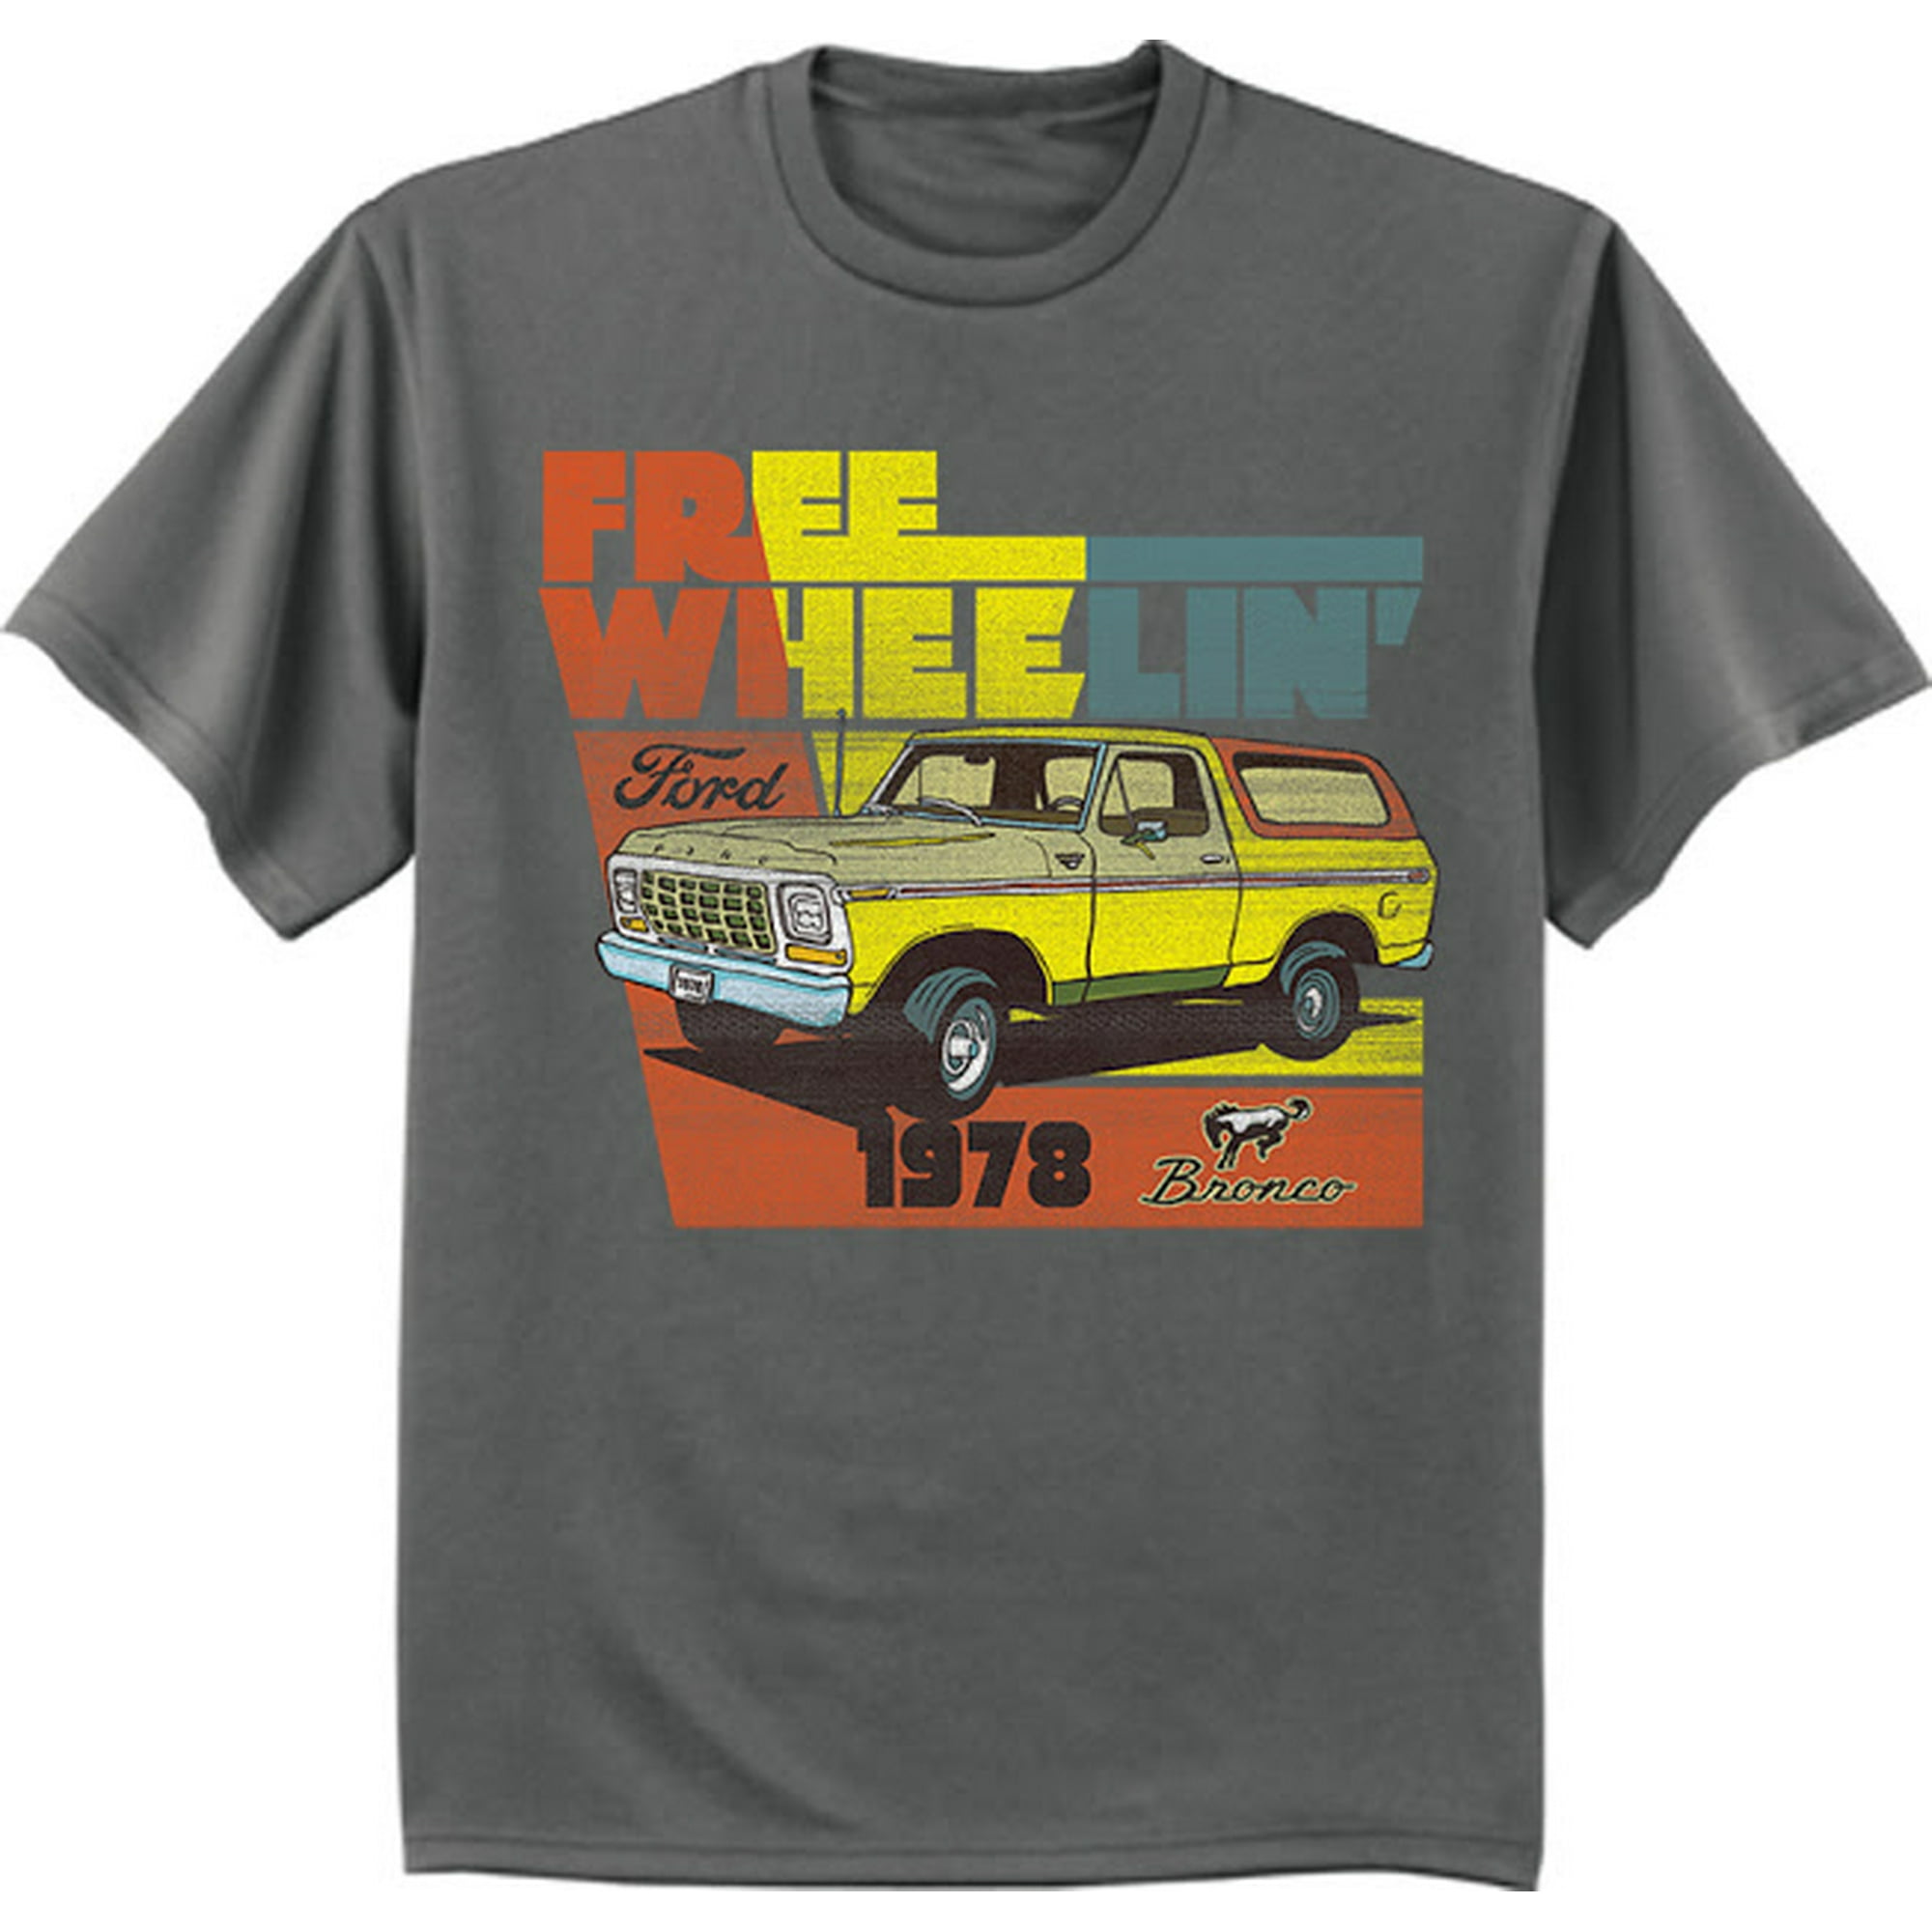 Decked Out Duds Ford Bronco T-Shirt Mens Graphic Tee, Men's, Size: 4XL, Gray